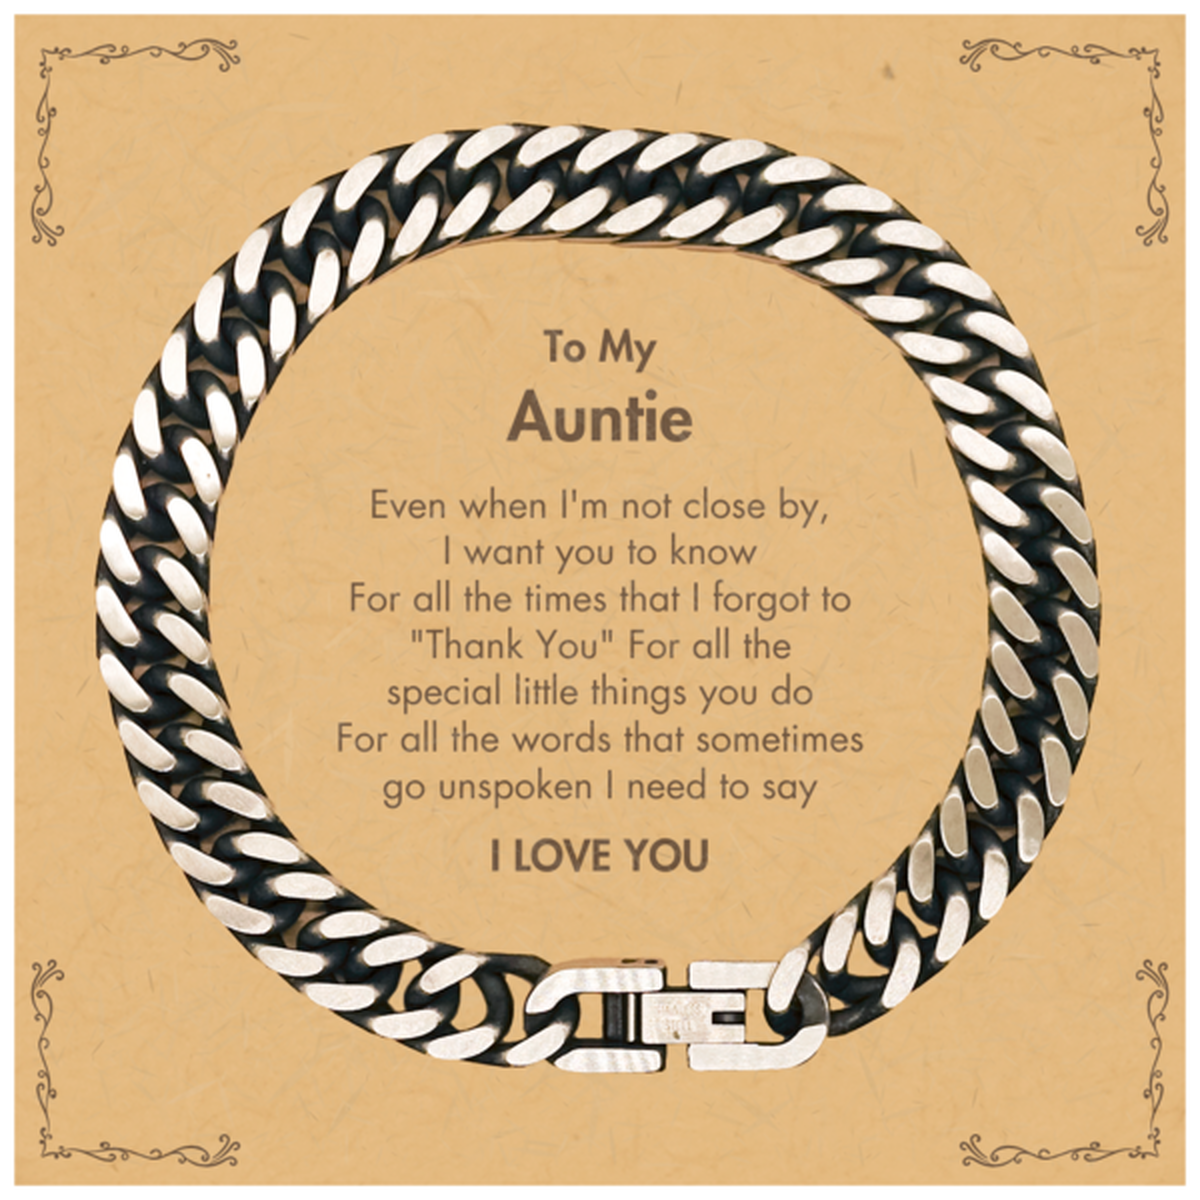 Thank You Gifts for Auntie, Keepsake Cuban Link Chain Bracelet Gifts for Auntie Birthday Mother's day Father's Day Auntie For all the words That sometimes go unspoken I need to say I LOVE YOU